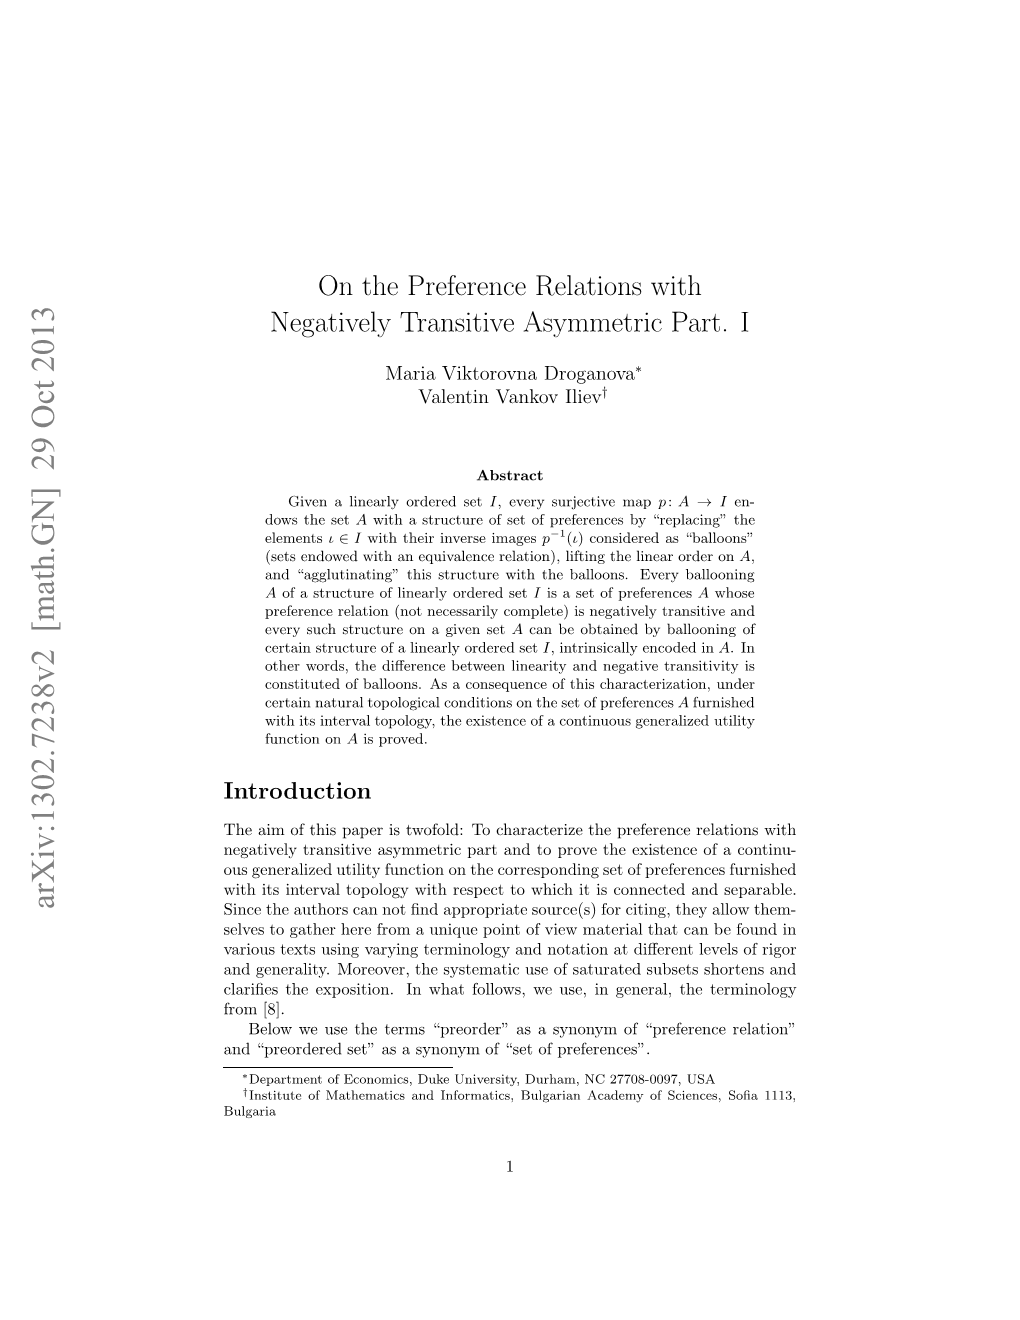 On the Preference Relations with Negatively Transitive Asymmetric Part. I